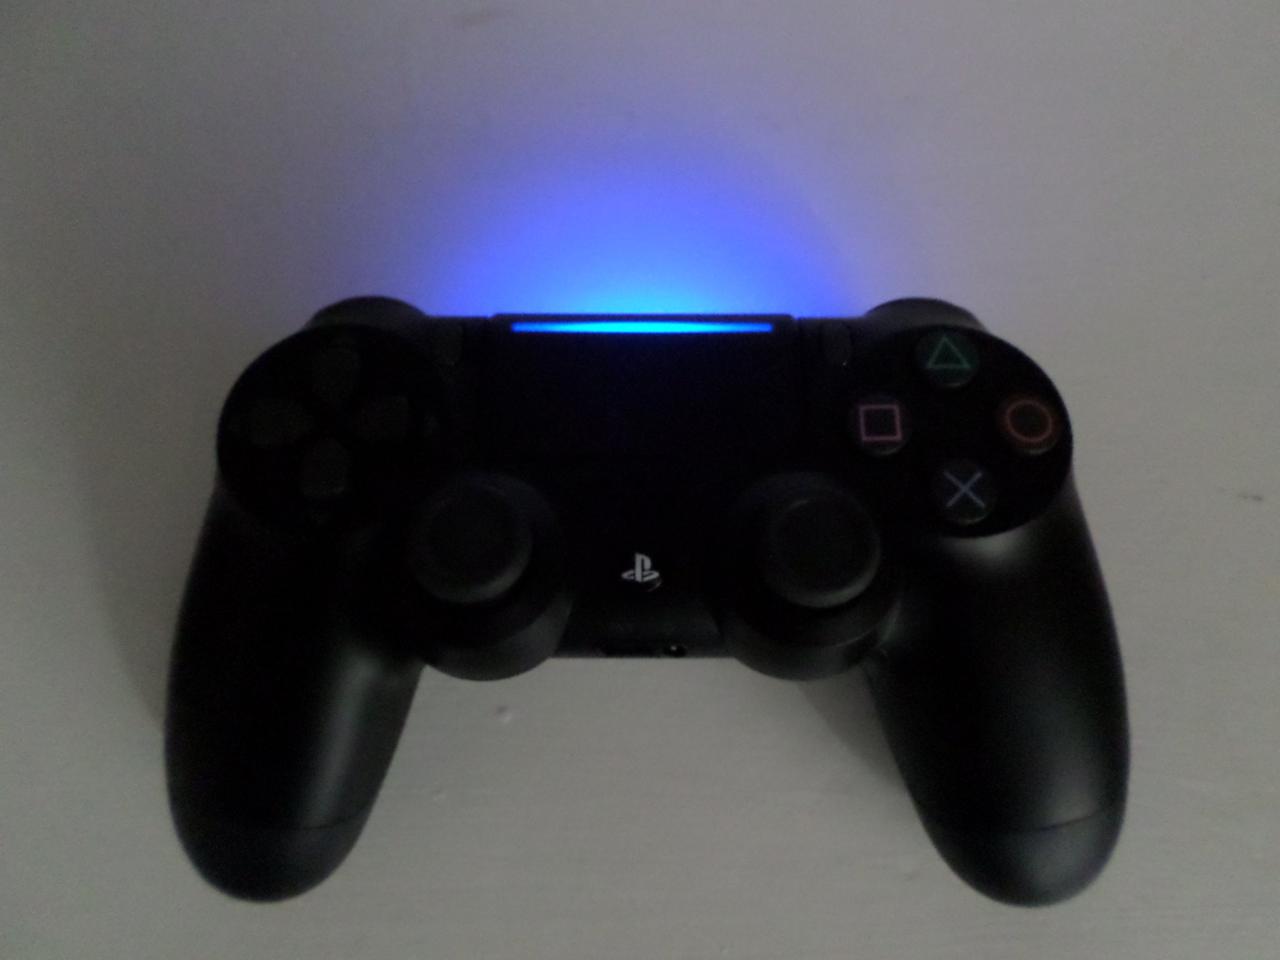 Picture of the new controller with added light bar, credit: shortman82